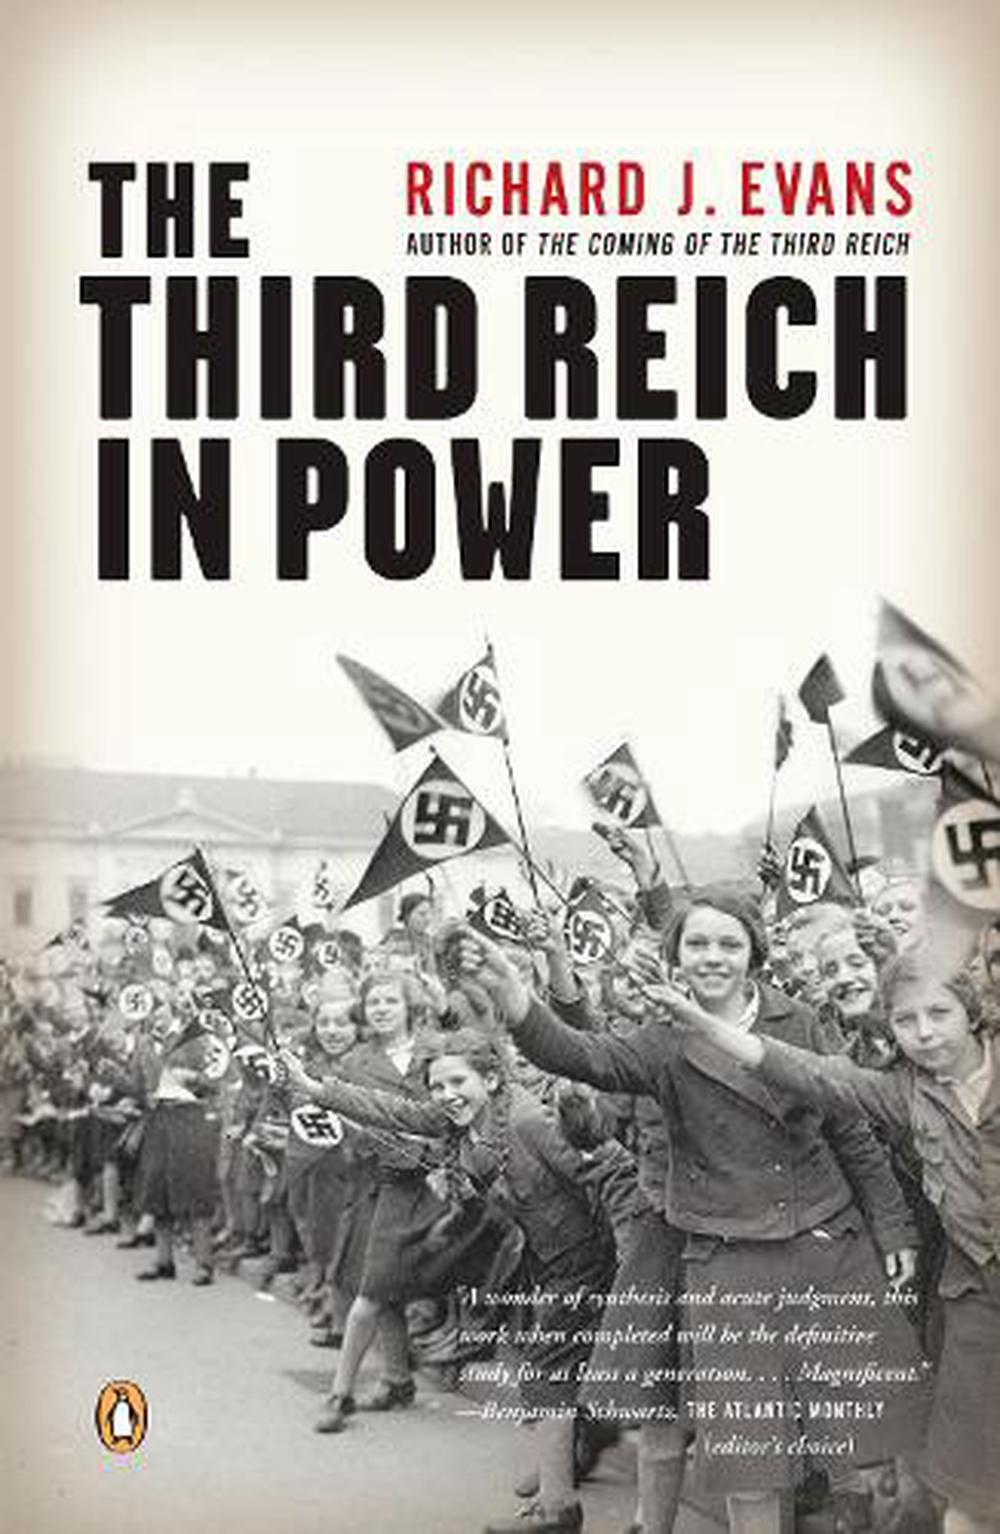 travellers to the third reich